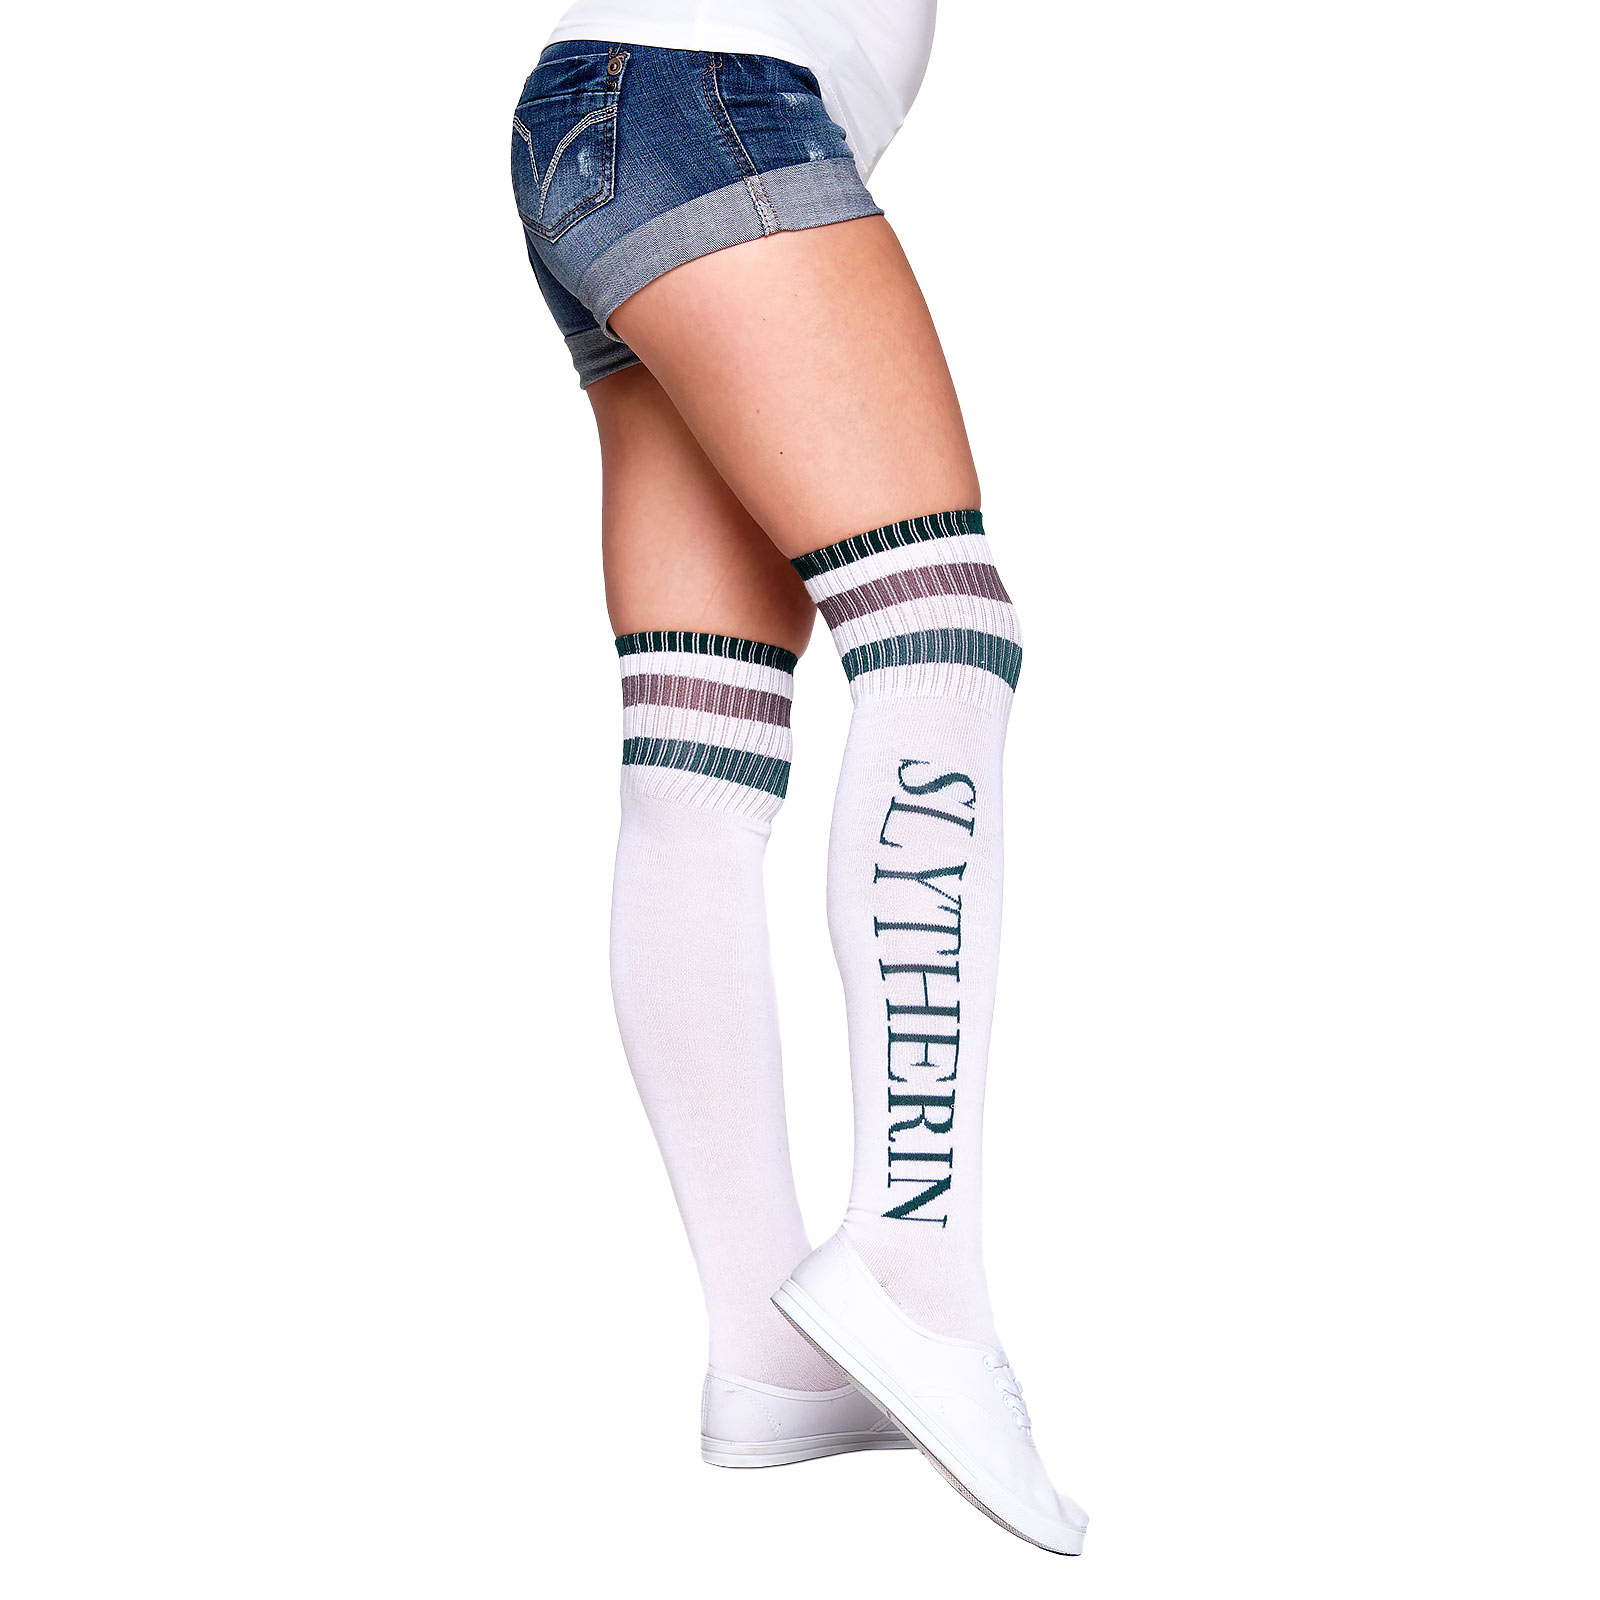 Harry Potter - Chaussettes montantes Slytherin